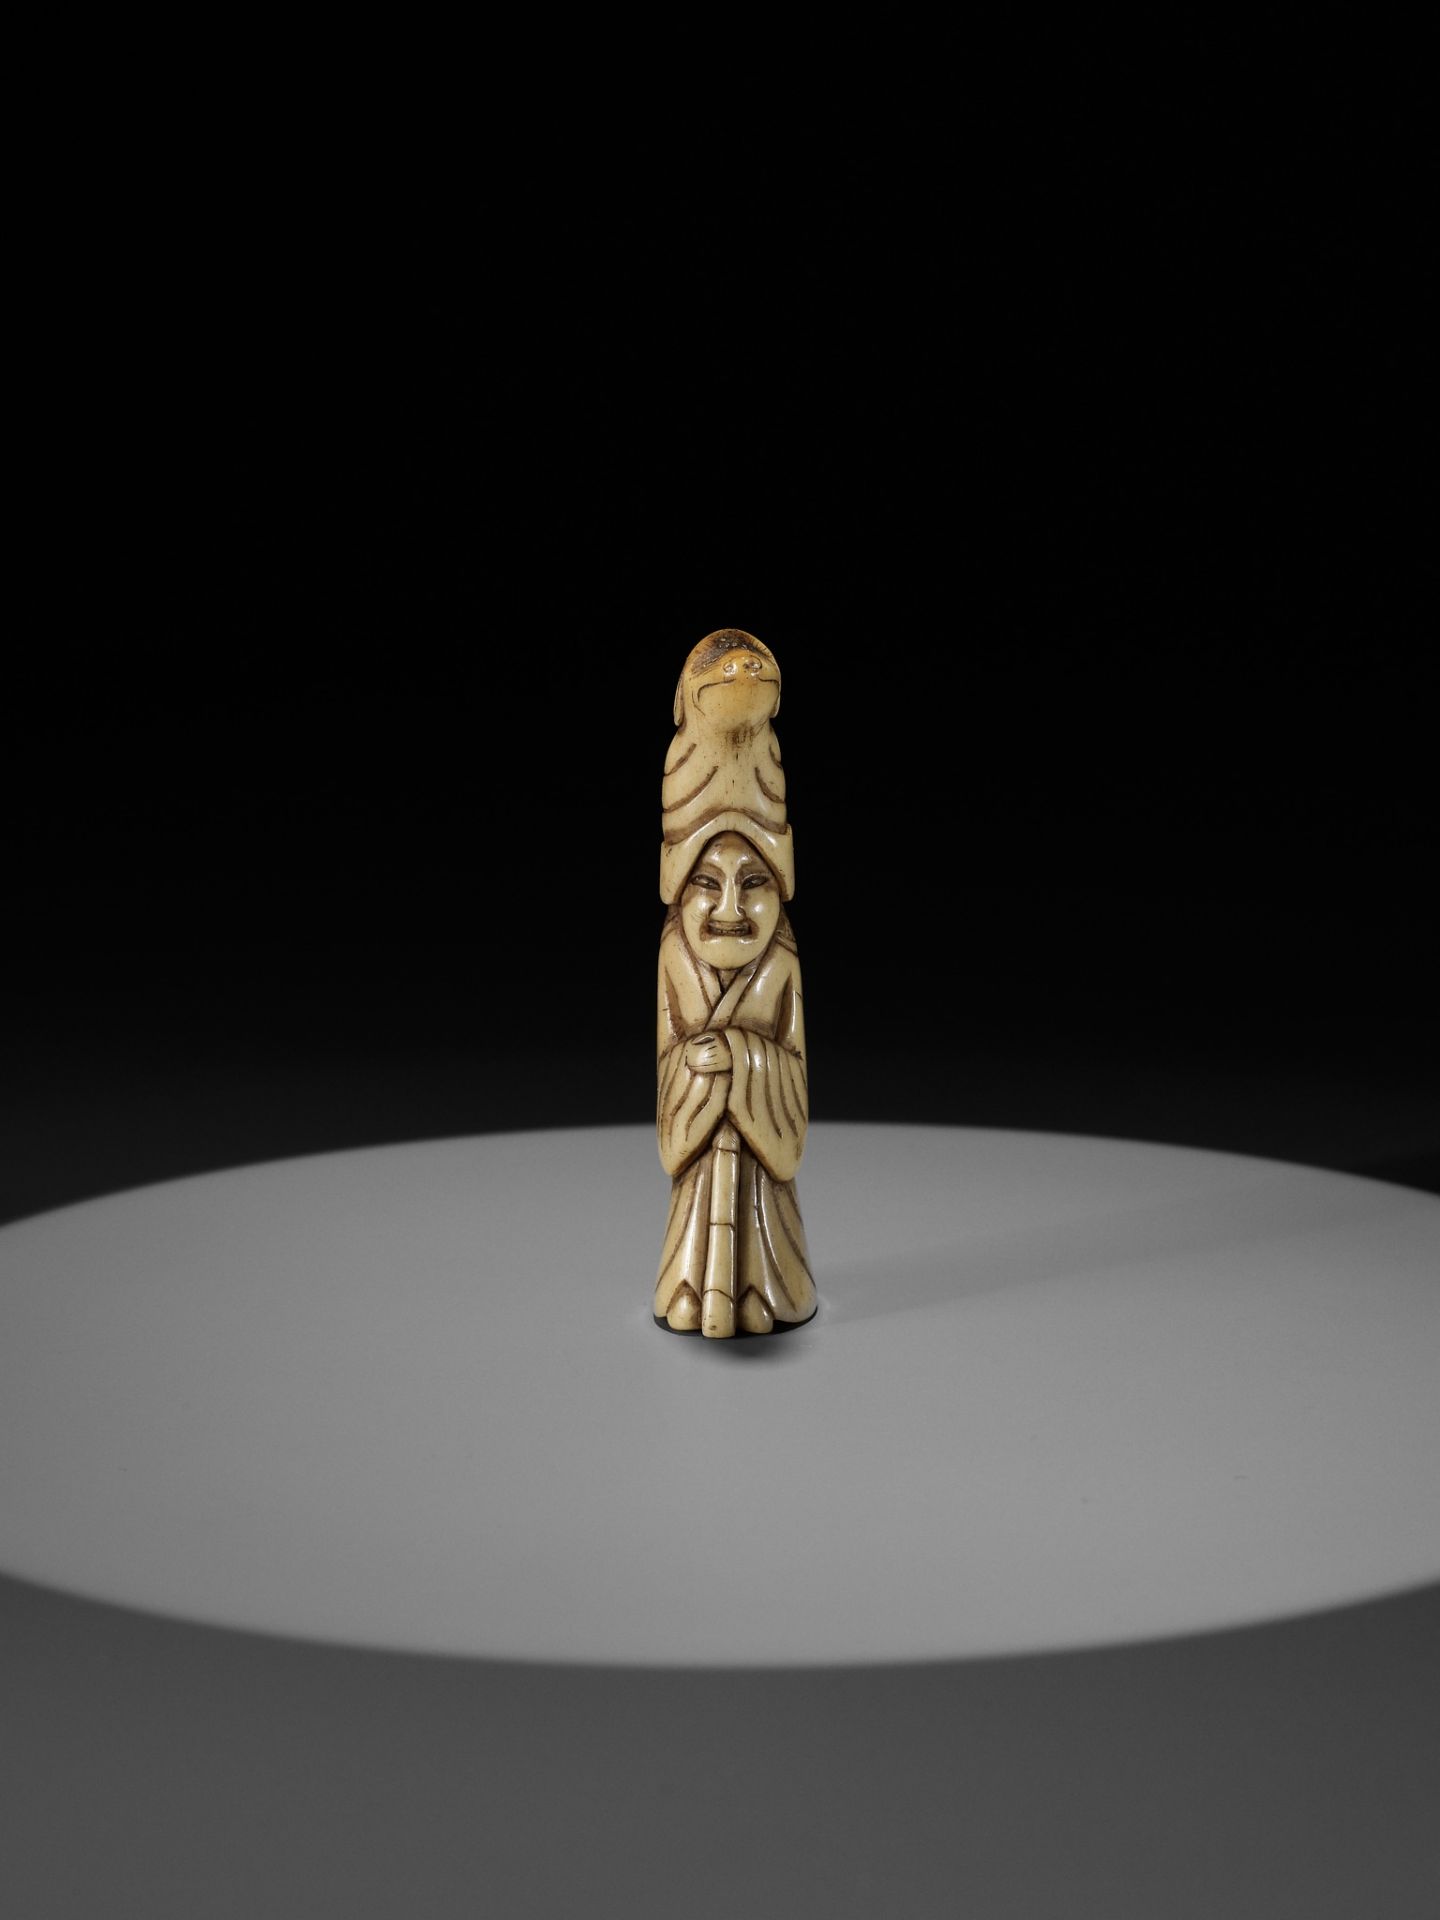 A RARE STAG ANTLER NETSUKE OF A PUPPETEER WITH A DOG PUPPET ON HIS HEAD - Image 8 of 9